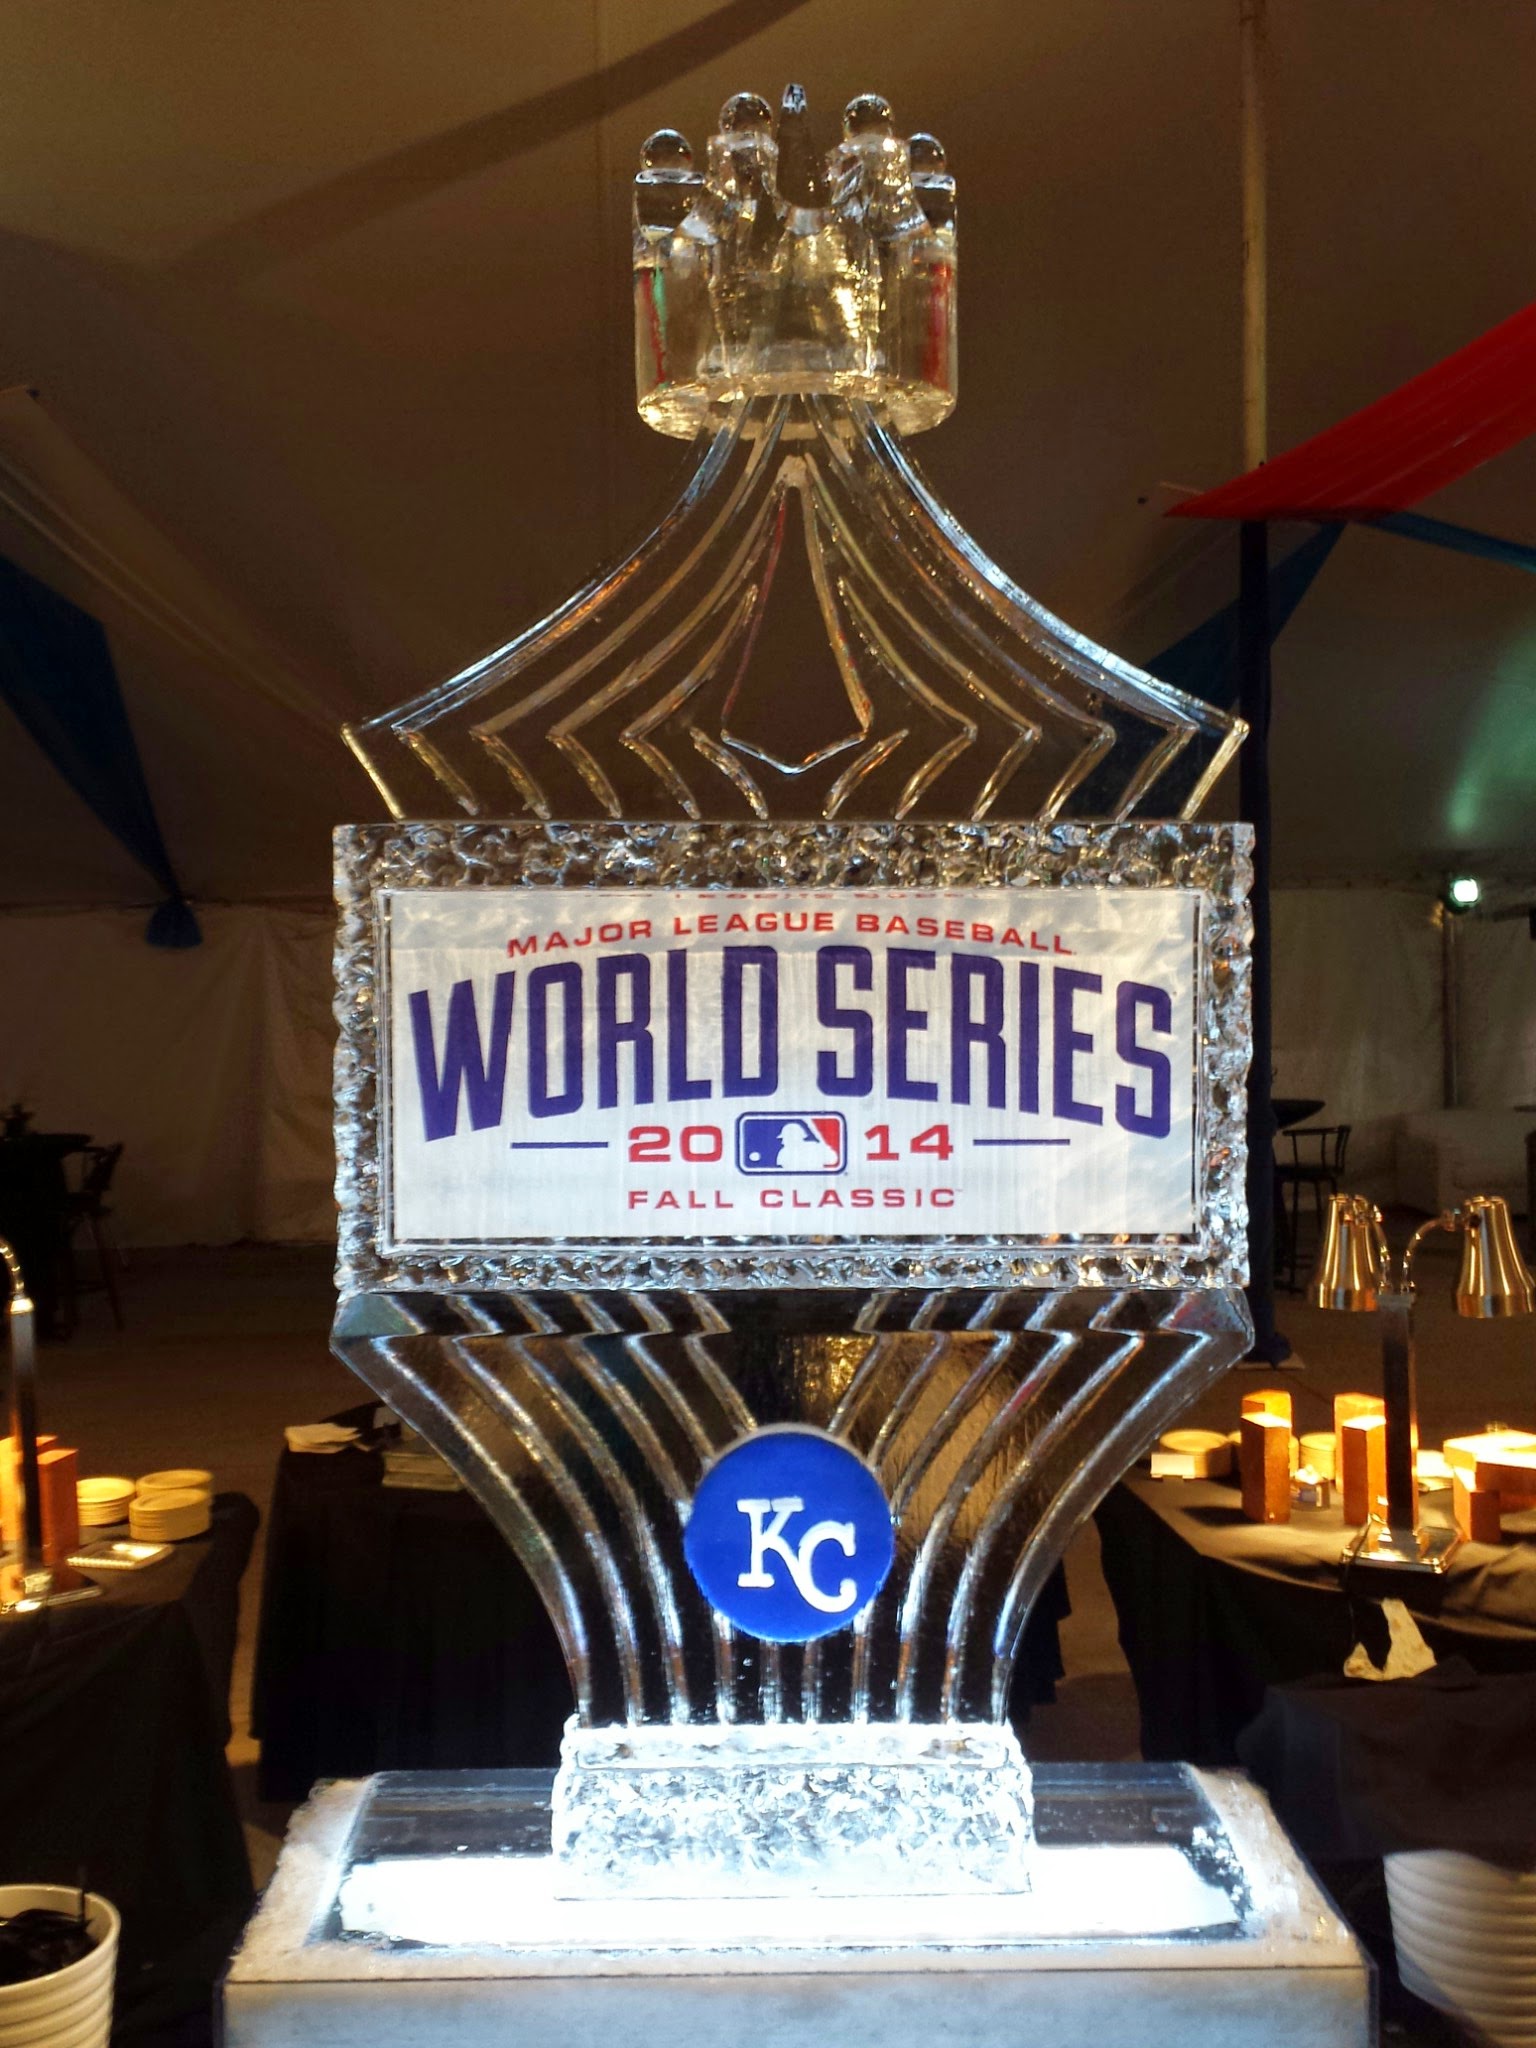 Ice Carvings for the Royals AL Playoffs and 2014 World Series!